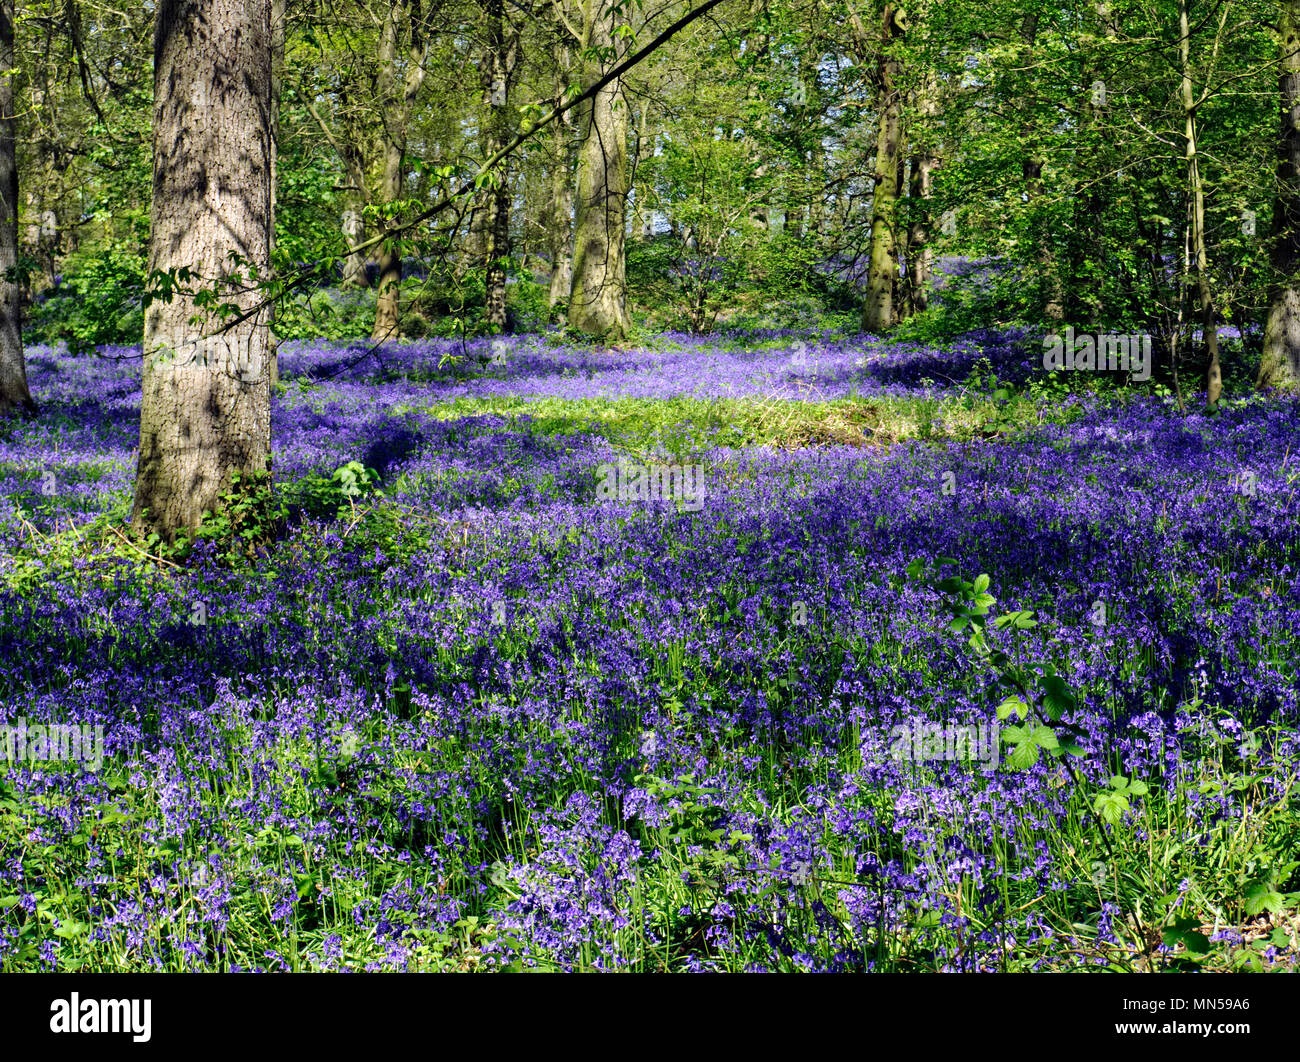 A beautiful display of English Bluebells (Hyacinthoides non-scripta) in Great Wood, near Blickling in Norfolk, England,in May 2018. Stock Photo